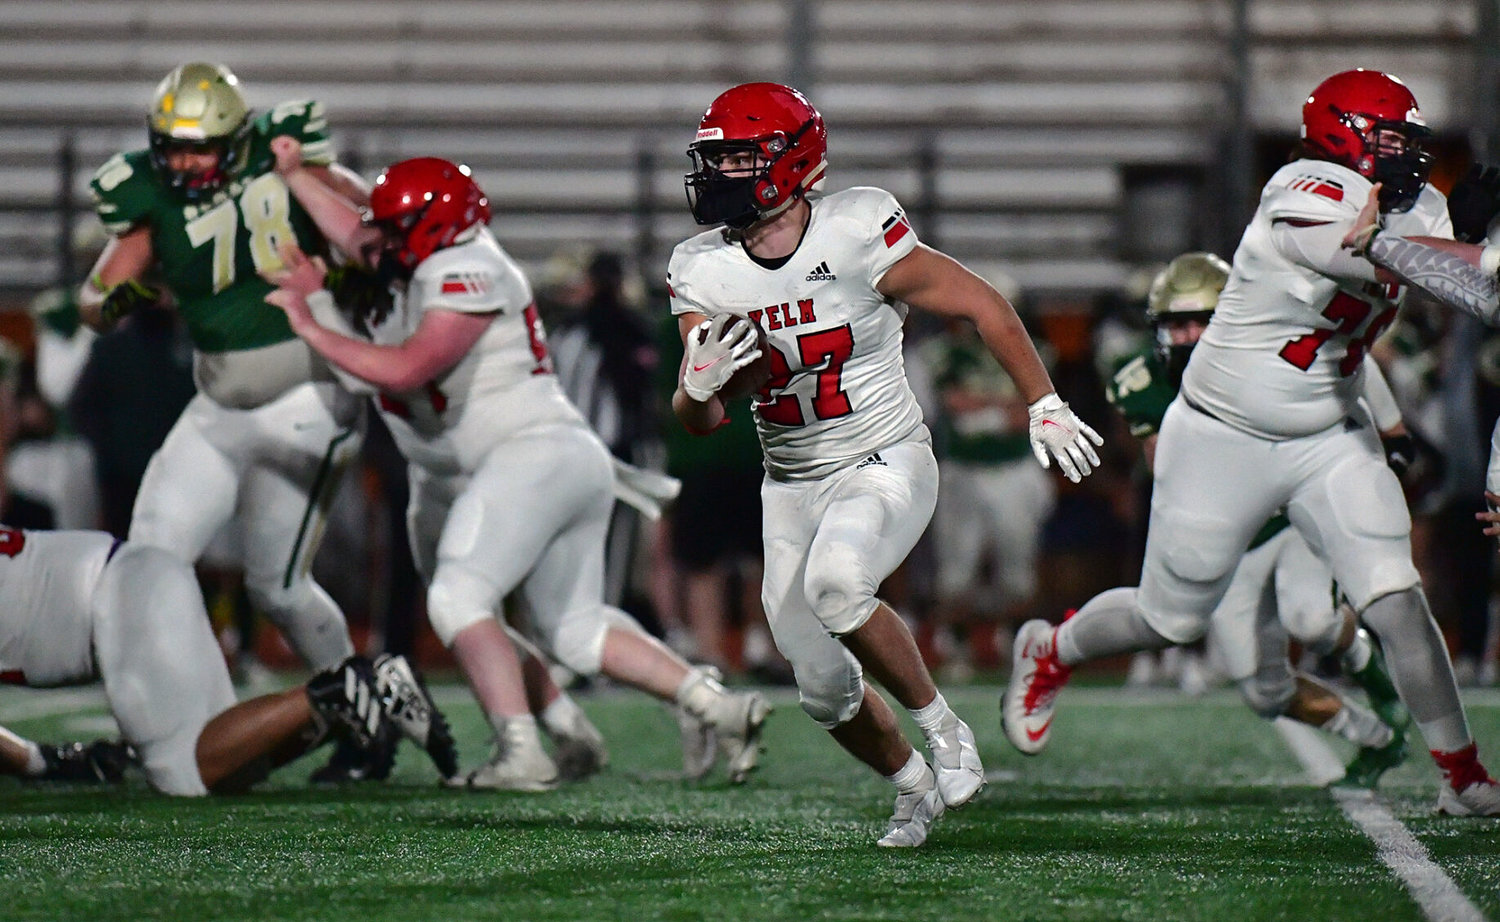 With the help of some nifty blocking, Yelm High School running back Sean Rohwedder rips off a big gain on Friday, March 12, against Timberline High School at South Sound Stadium.